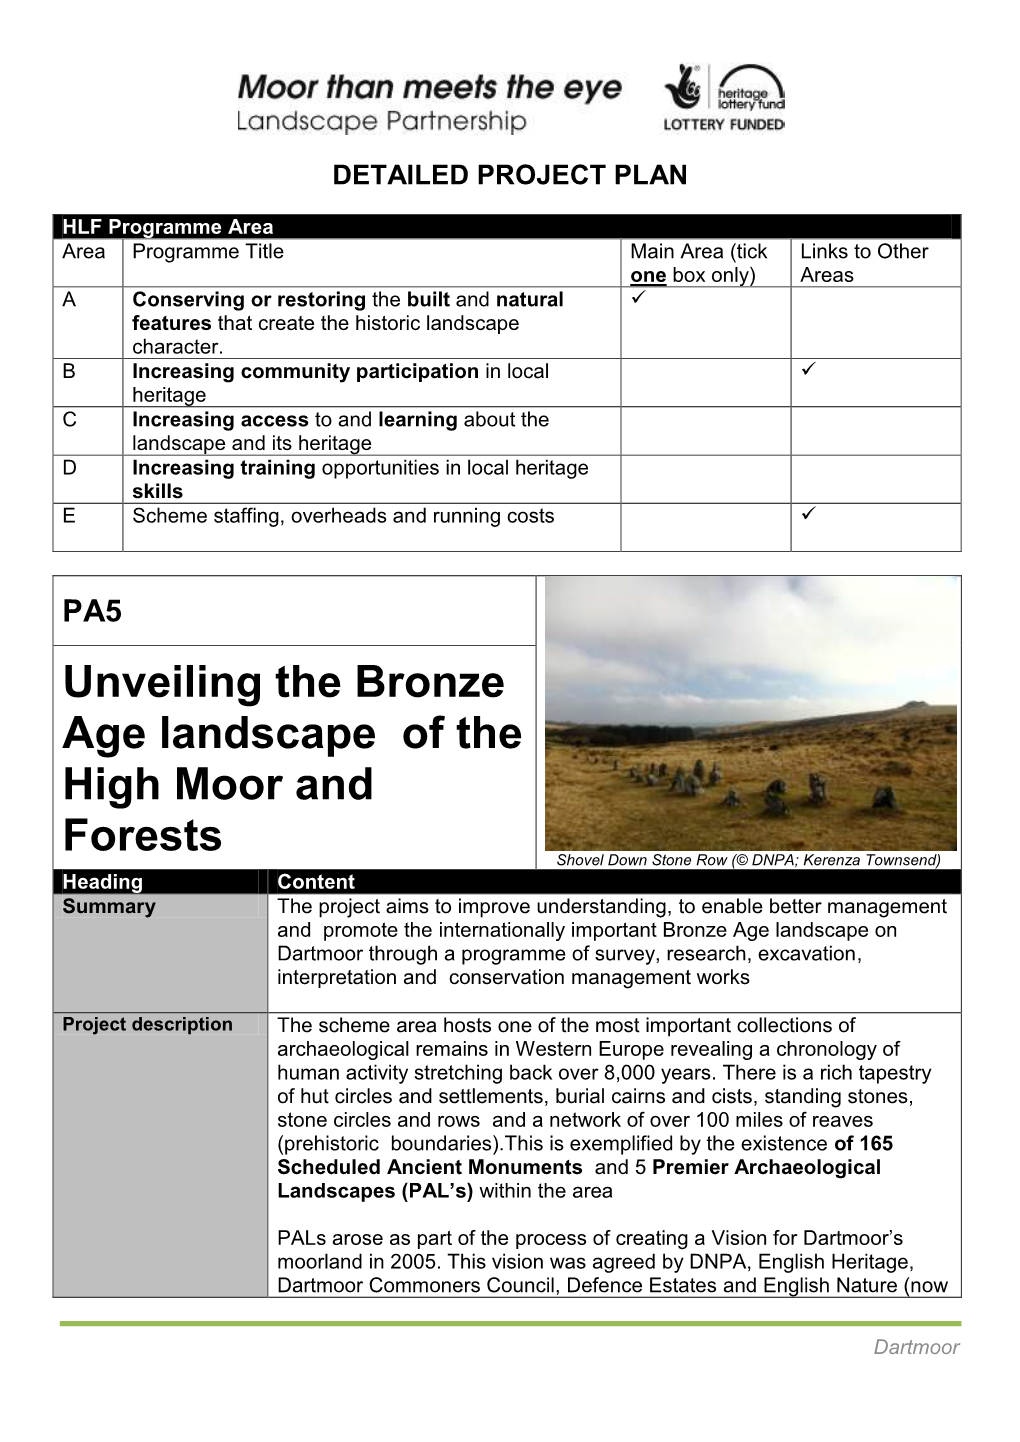 Unveiling the Bronze Age Landscape of the High Moor and Forests